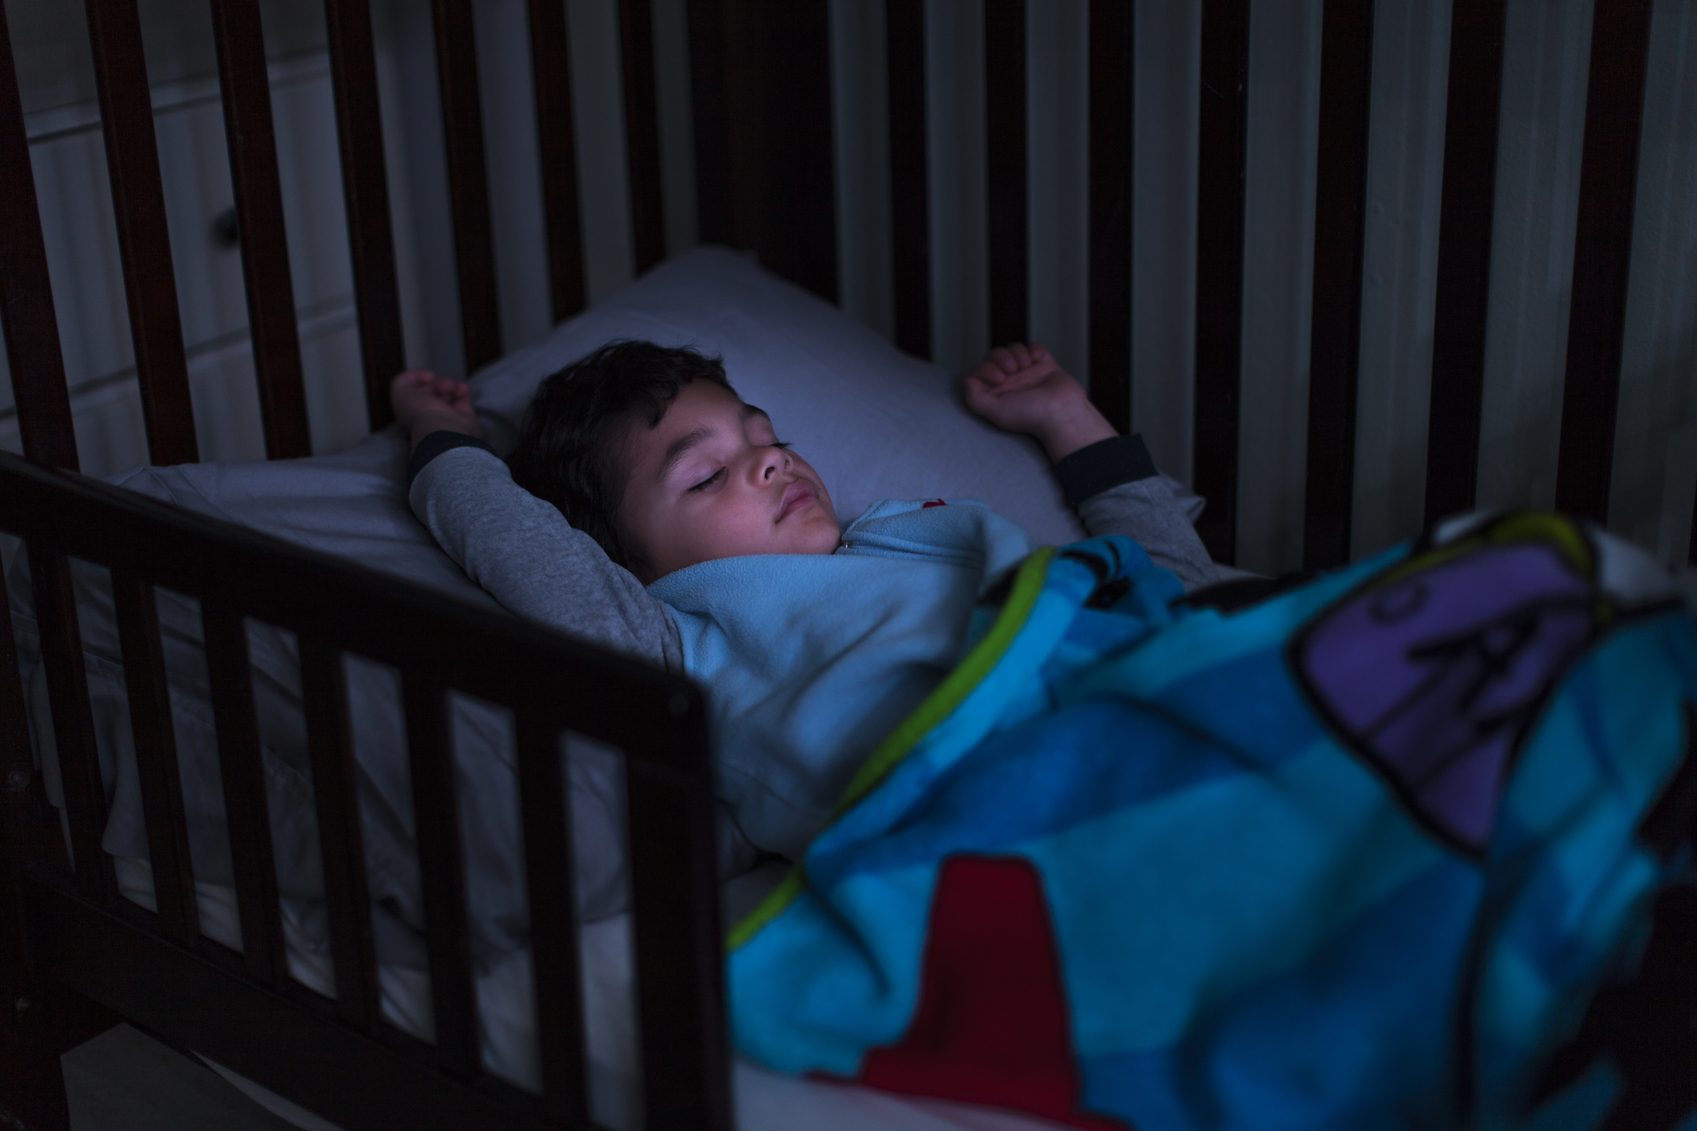 Stock photo of a young handsome boy sleeping in a bed with light on his face